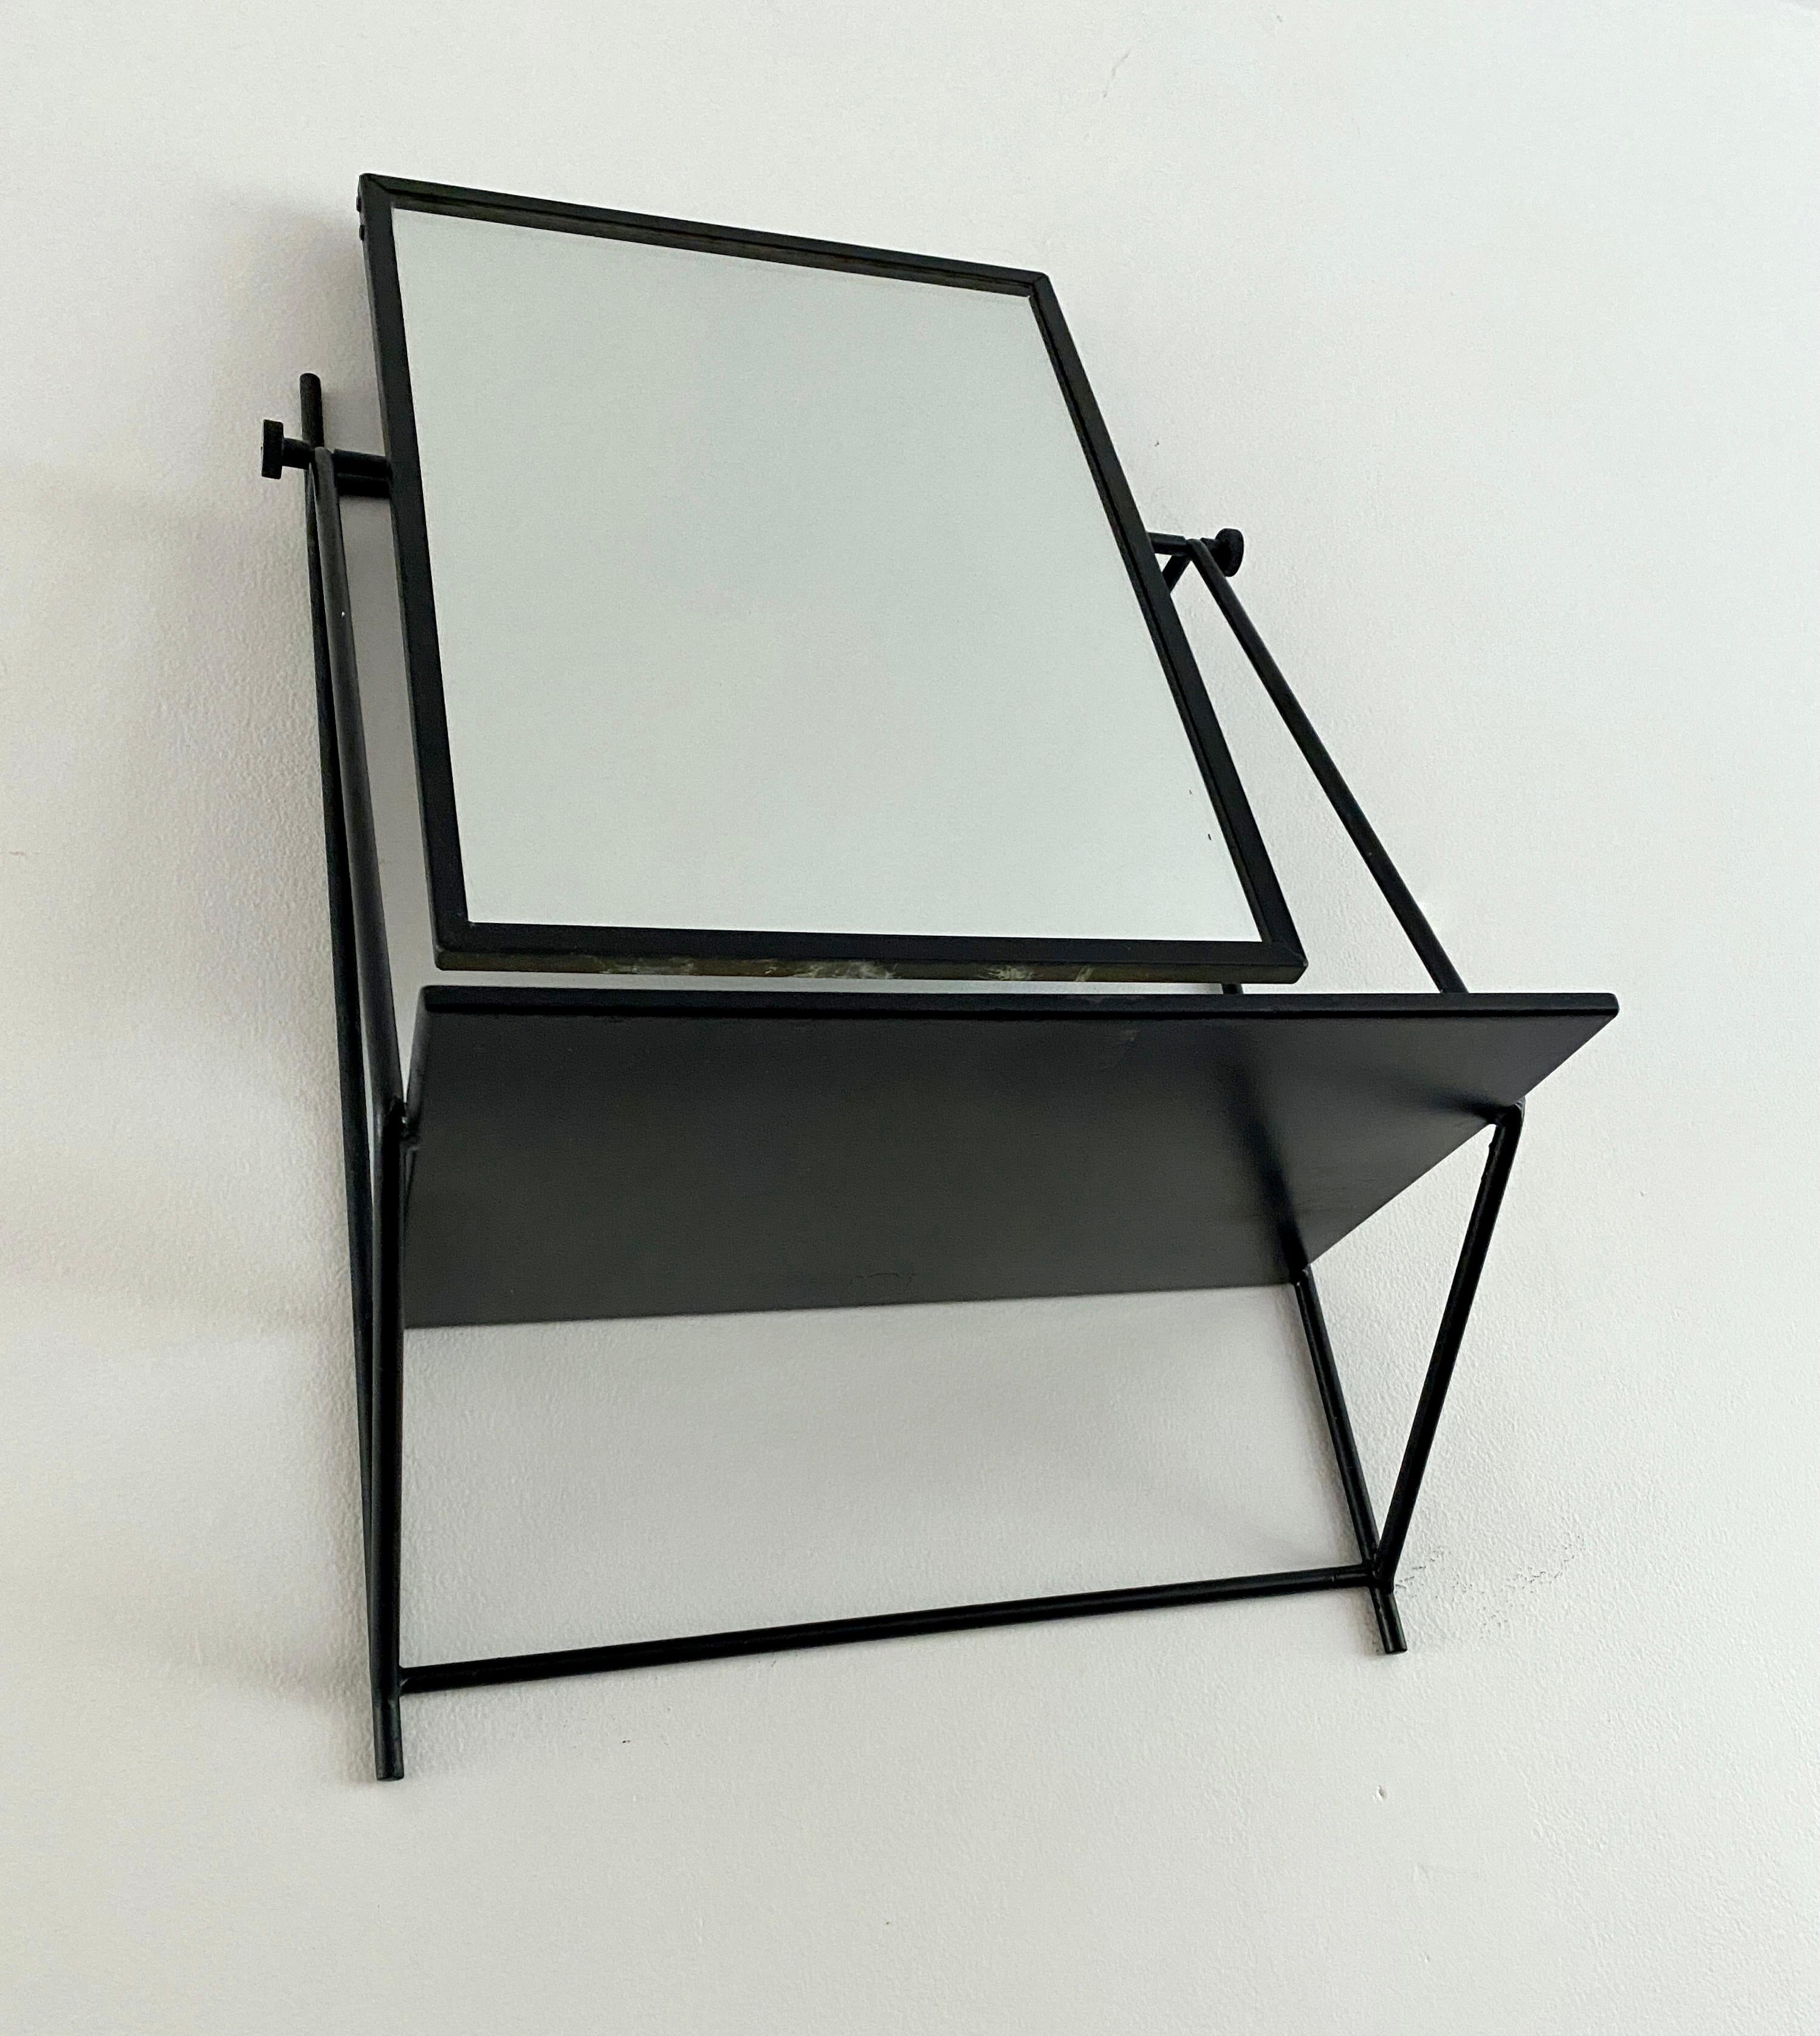 20th Century Paul McCobb Wall Mounted Mirror With Shelf For Bryce Originals For Sale